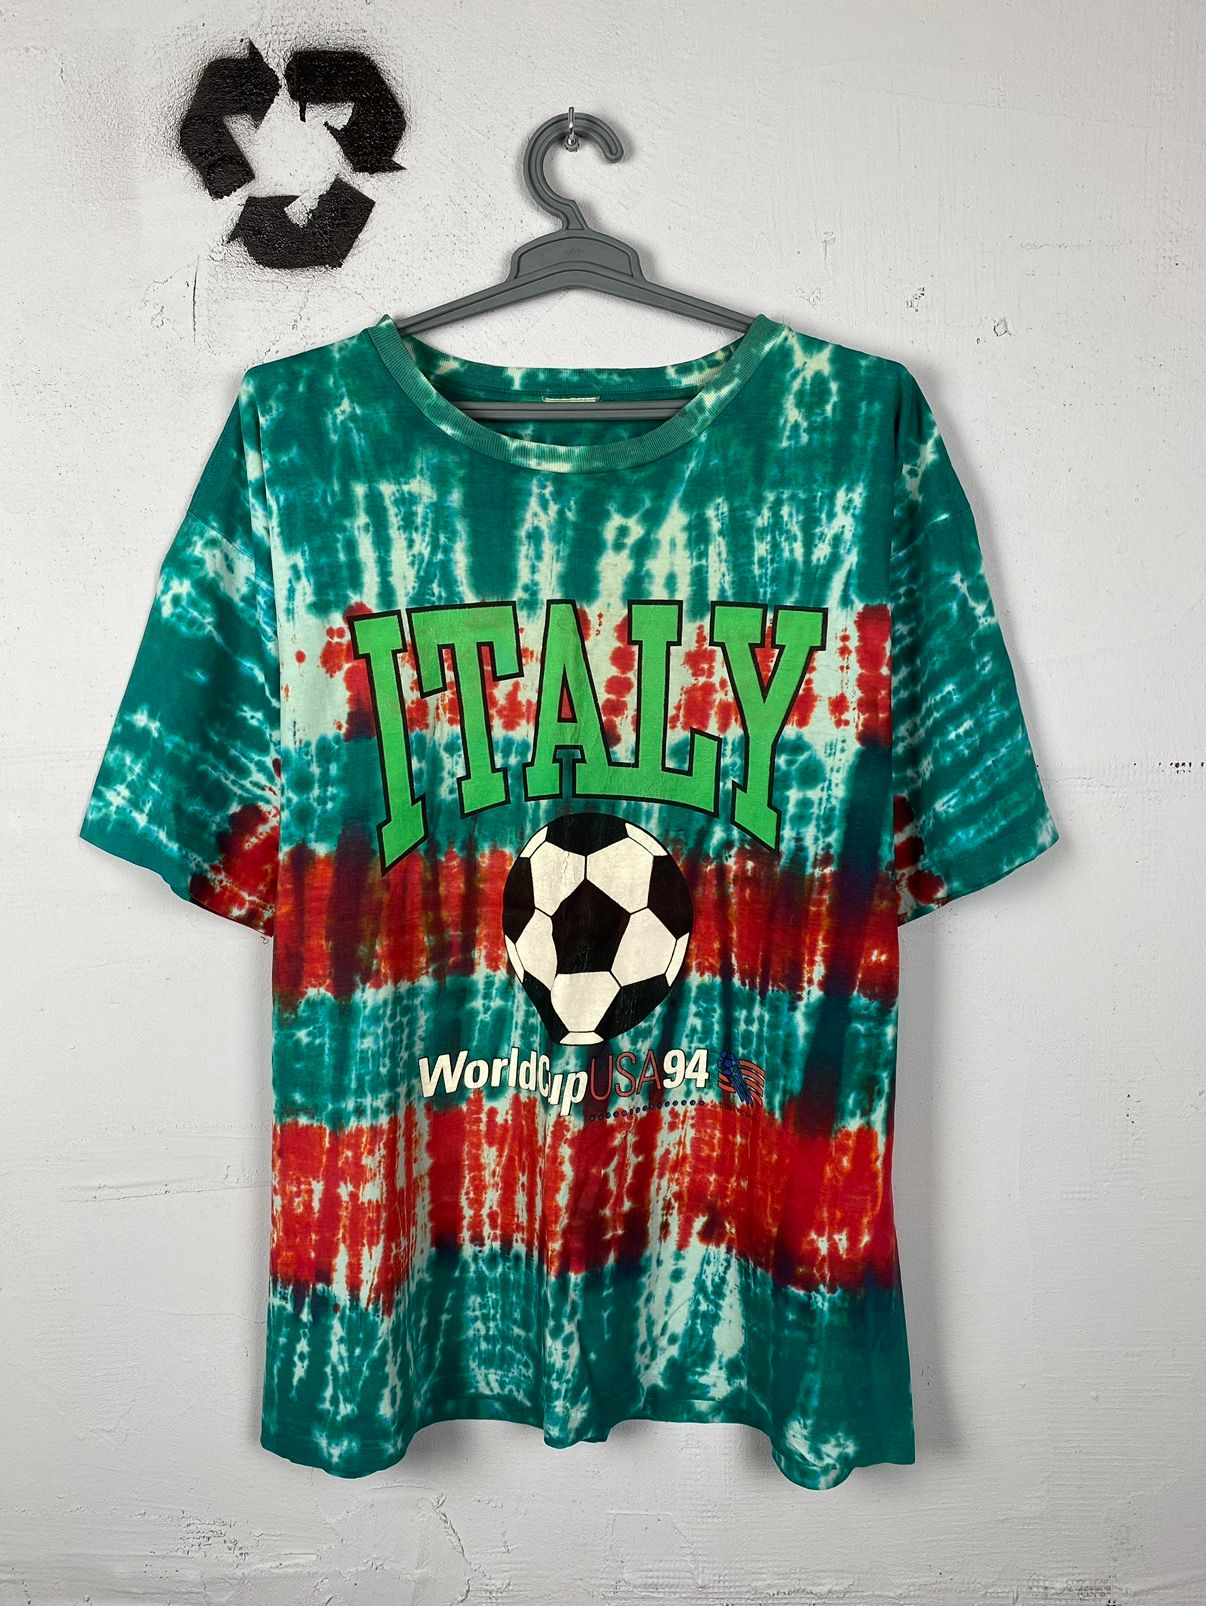 Pre-owned Band Tees X Rock Tees Vintage 90's Italy World Cup 1994 Tie Dye Punk T Shirt